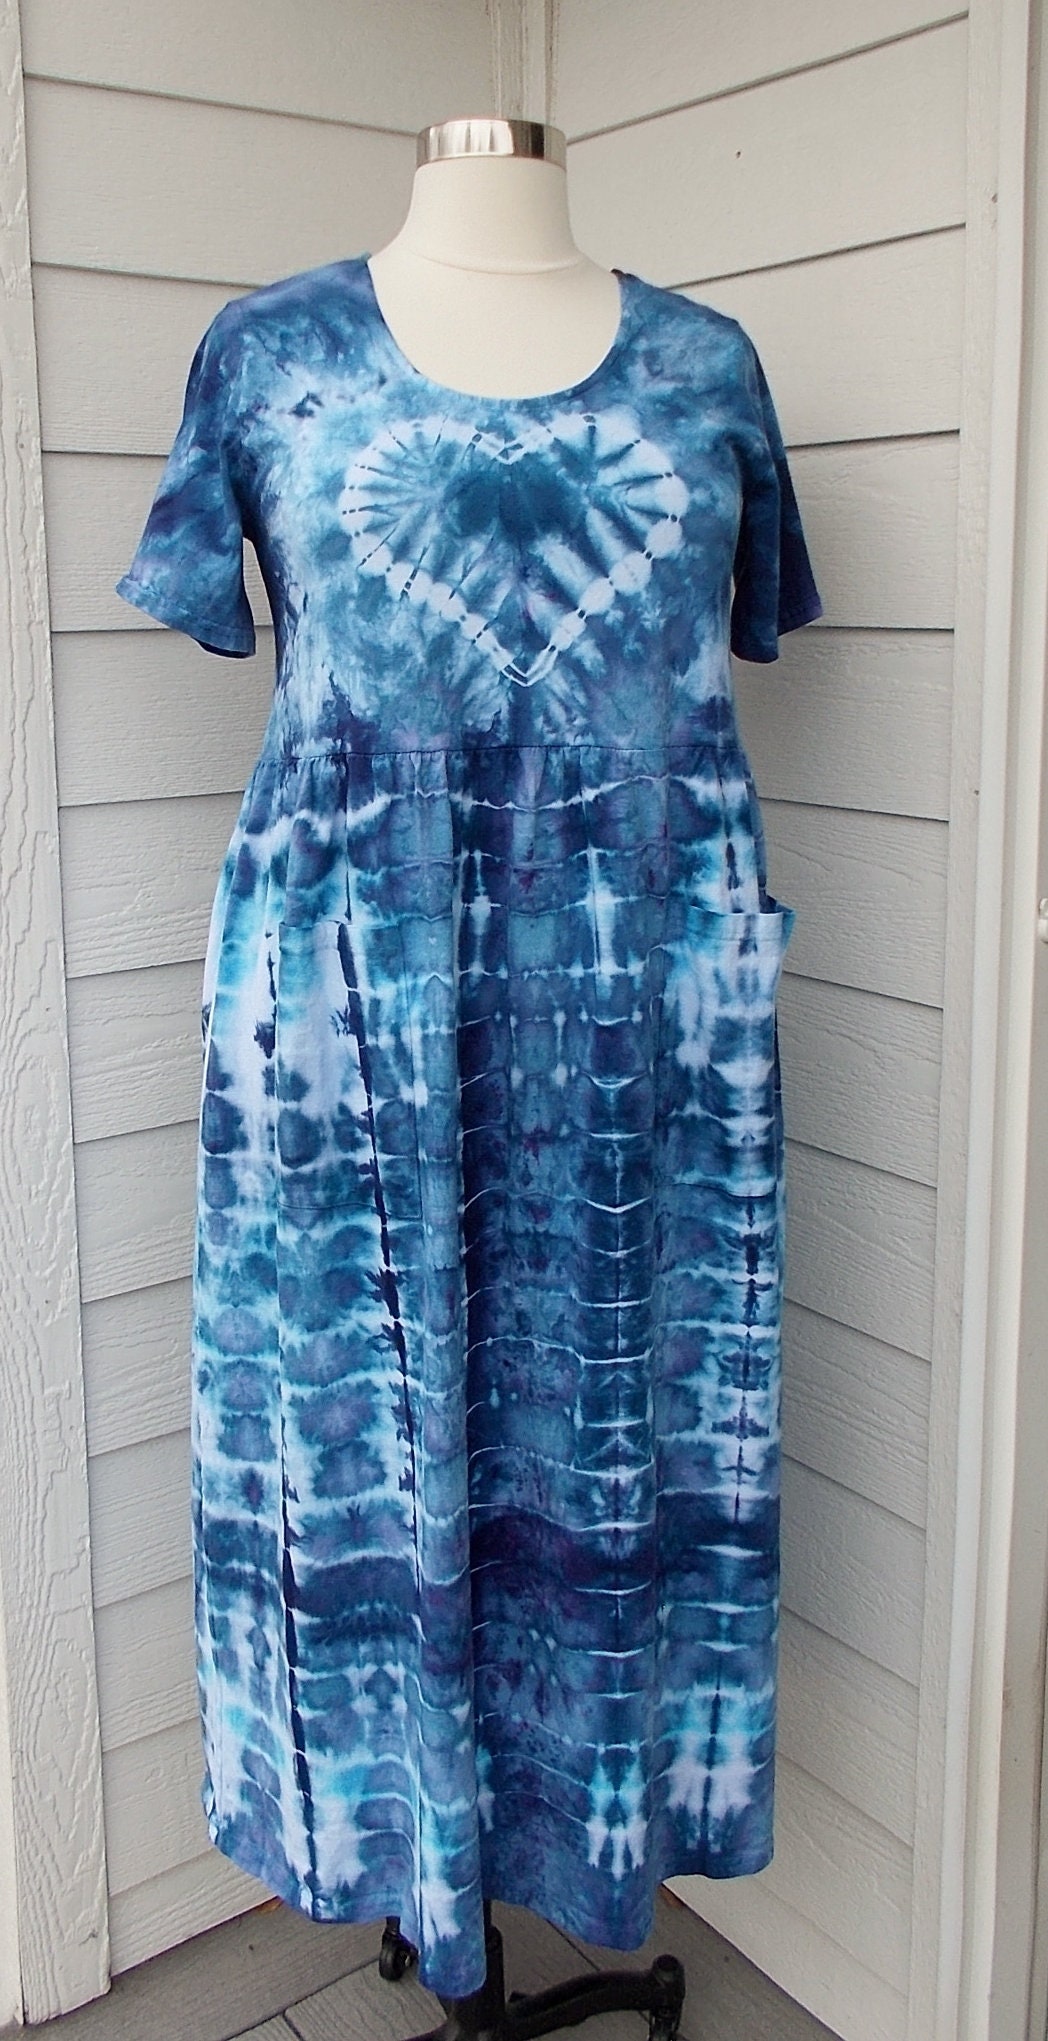 2X Farmer Dress with Pockets tie-dyed ice-dyed